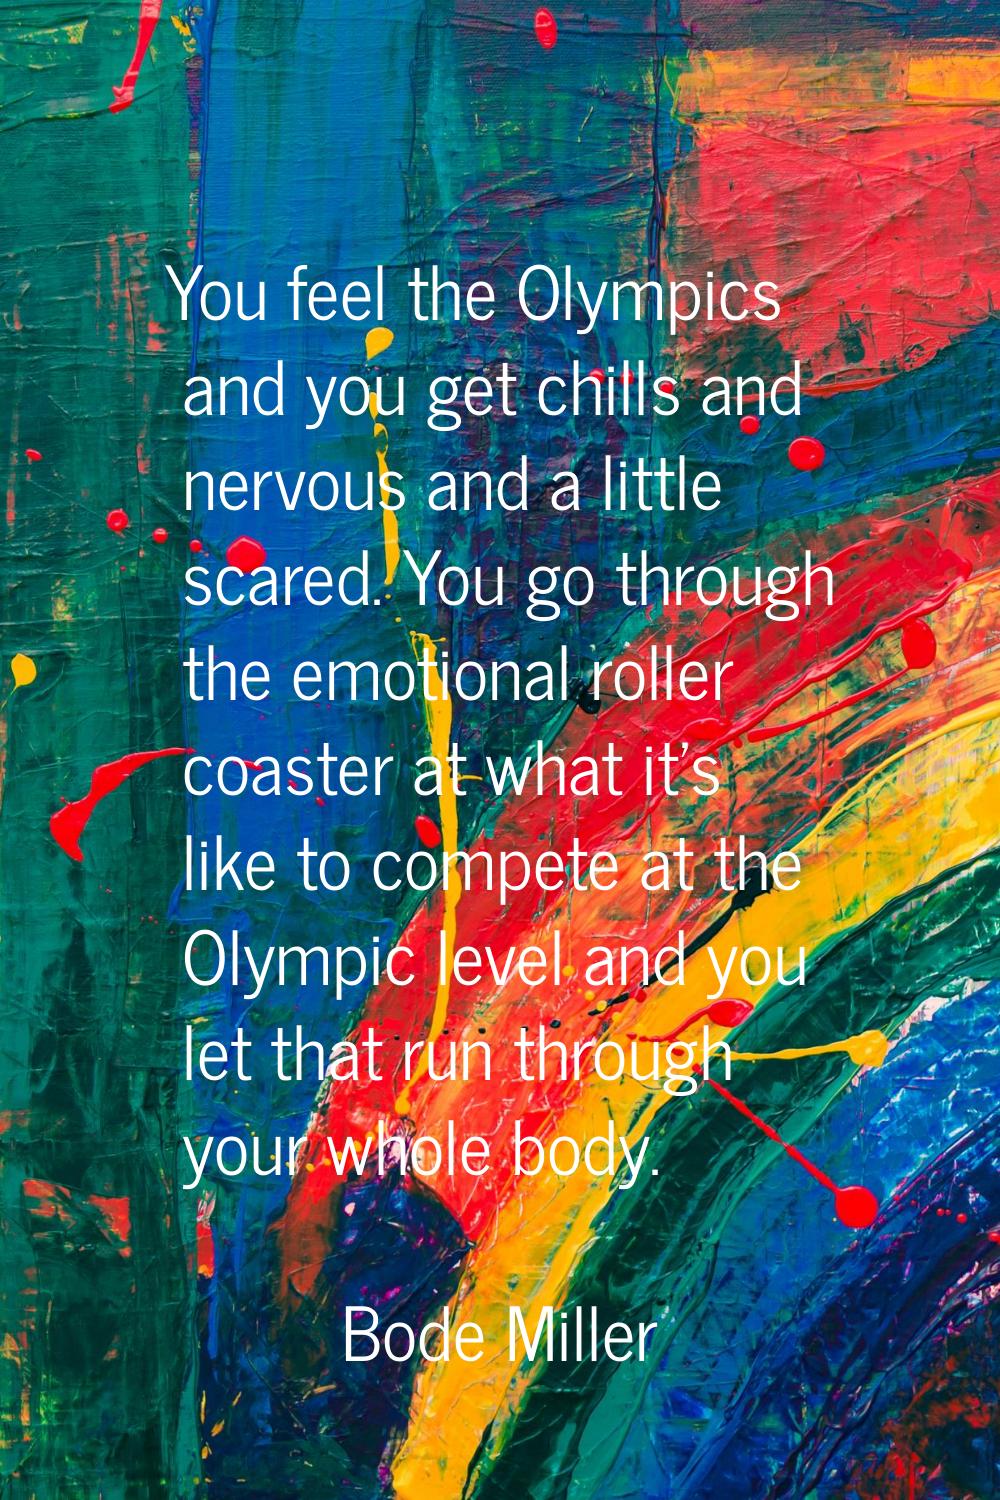 You feel the Olympics and you get chills and nervous and a little scared. You go through the emotio